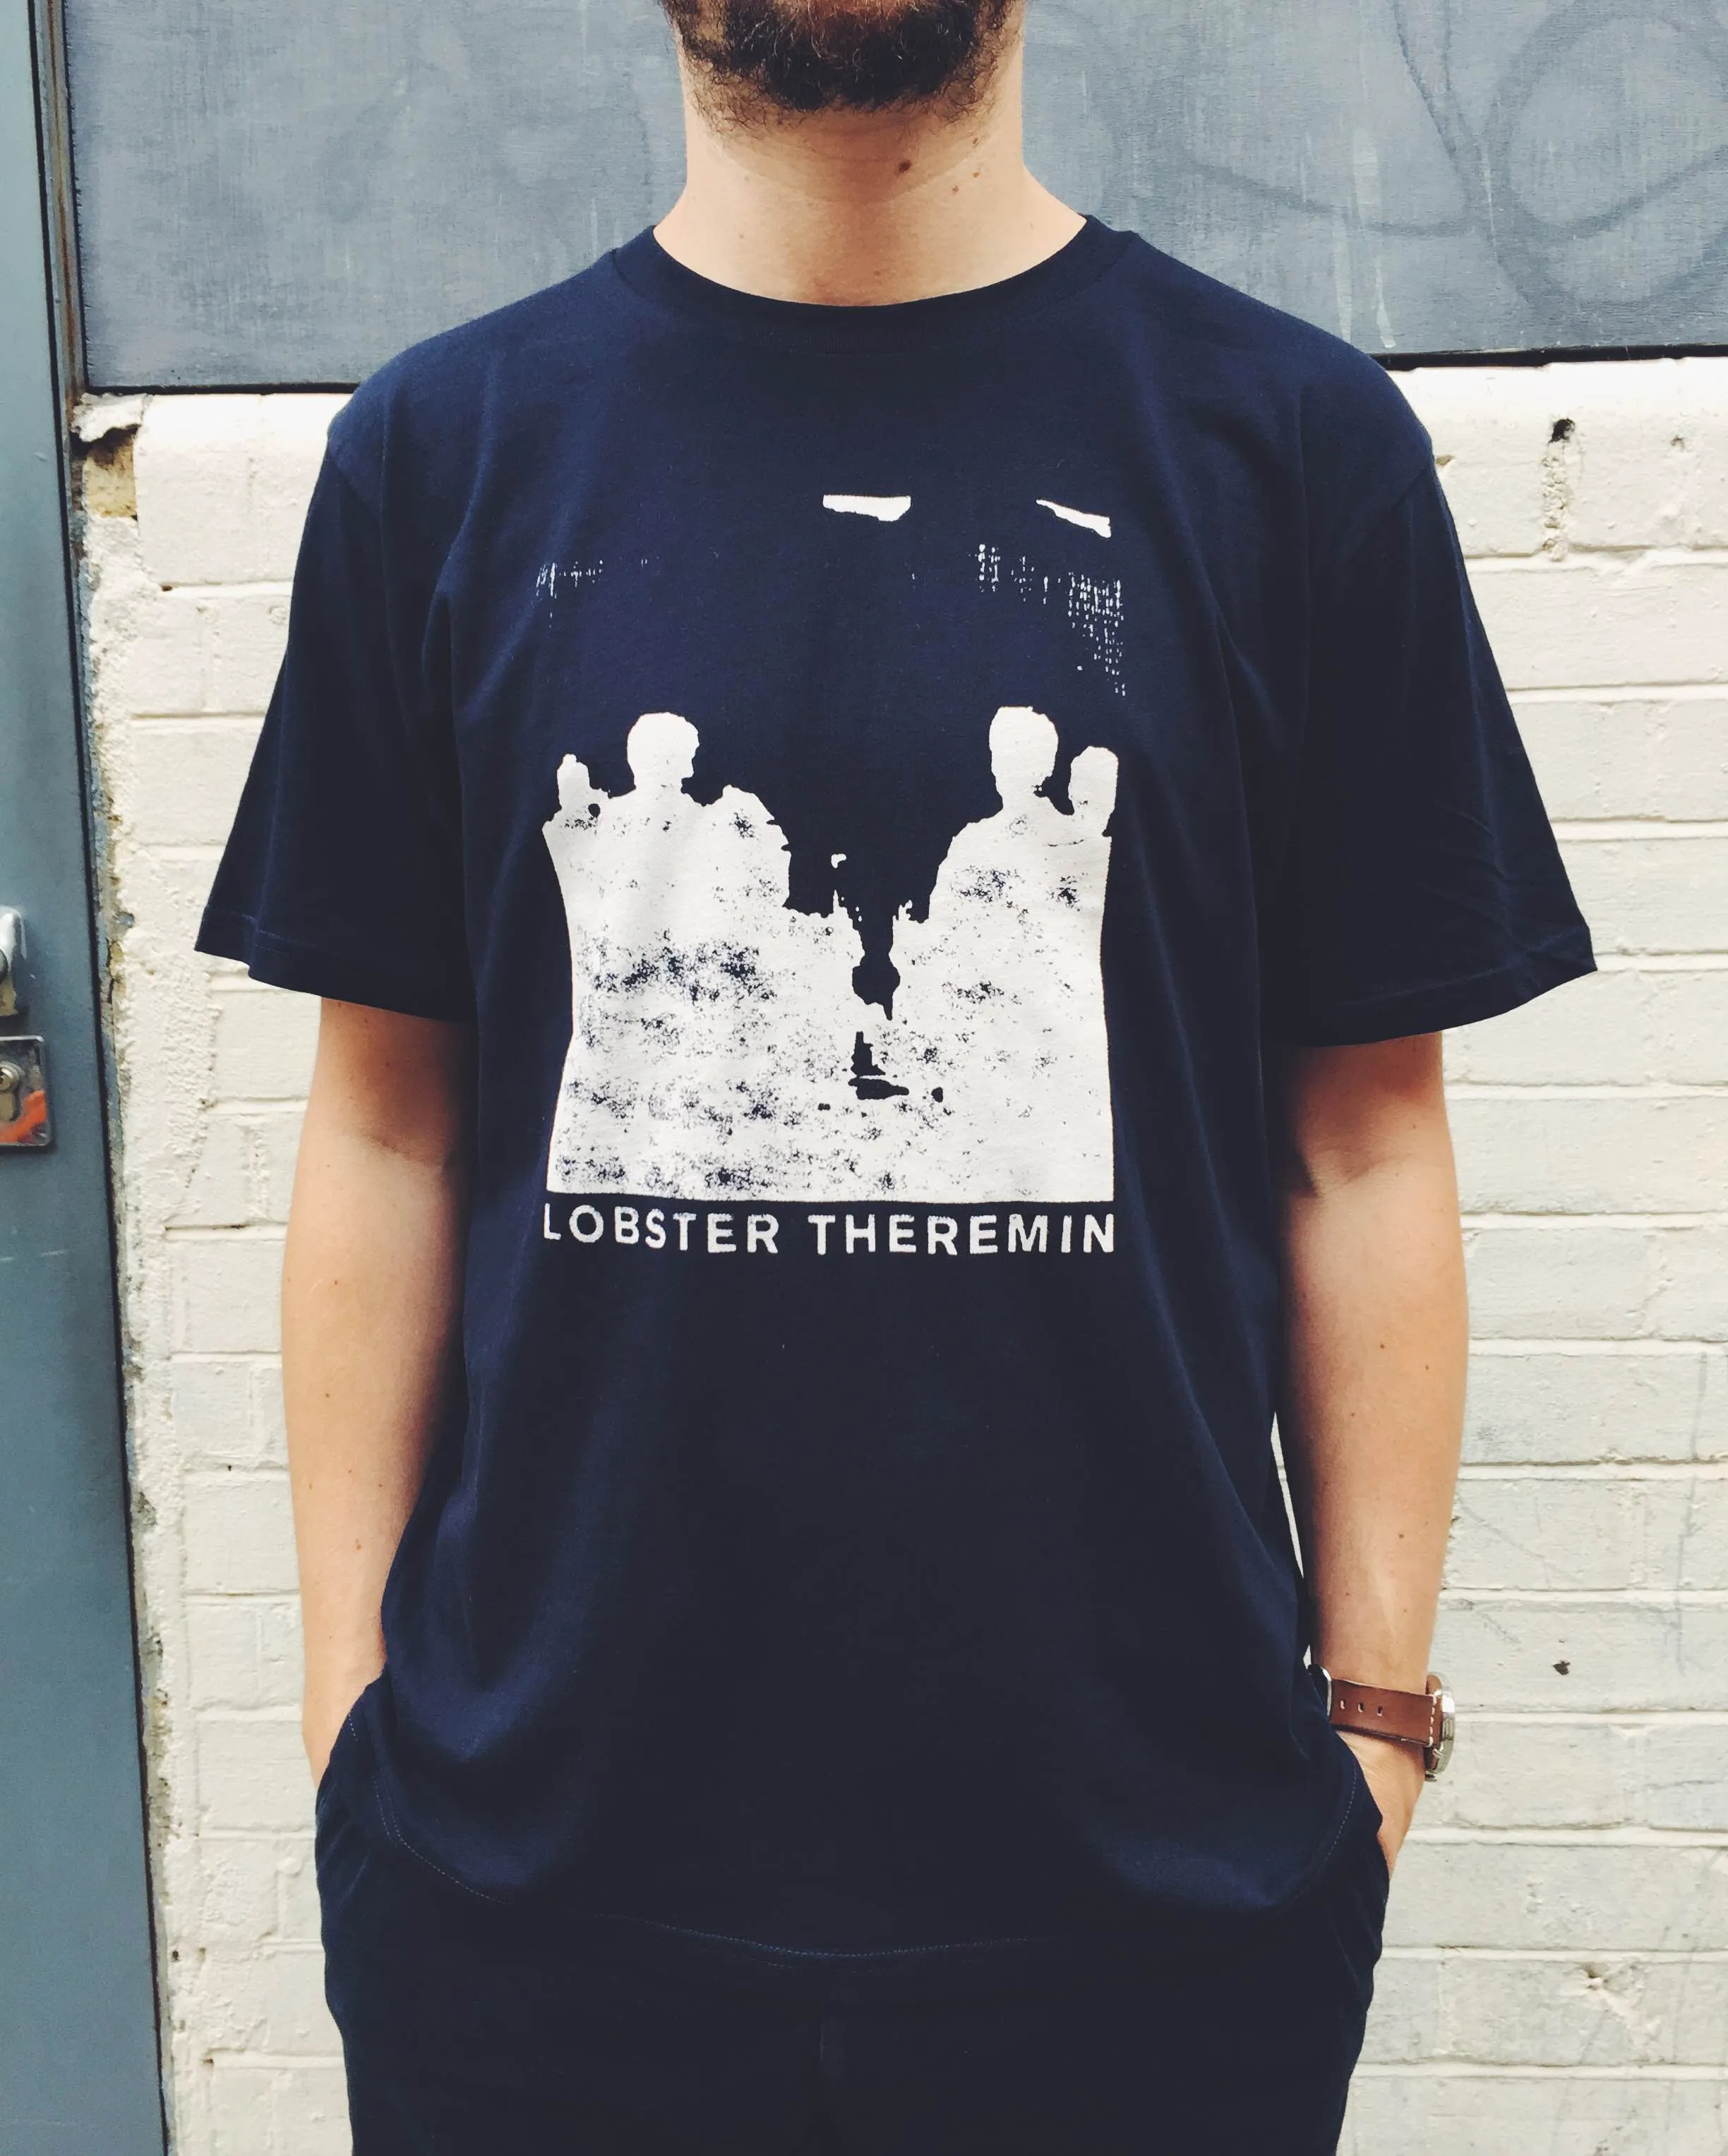 Lobster Theremin Tee - Daze Limited Edition Navy Stamp T-shirt  Men's / S-Size : WEAR